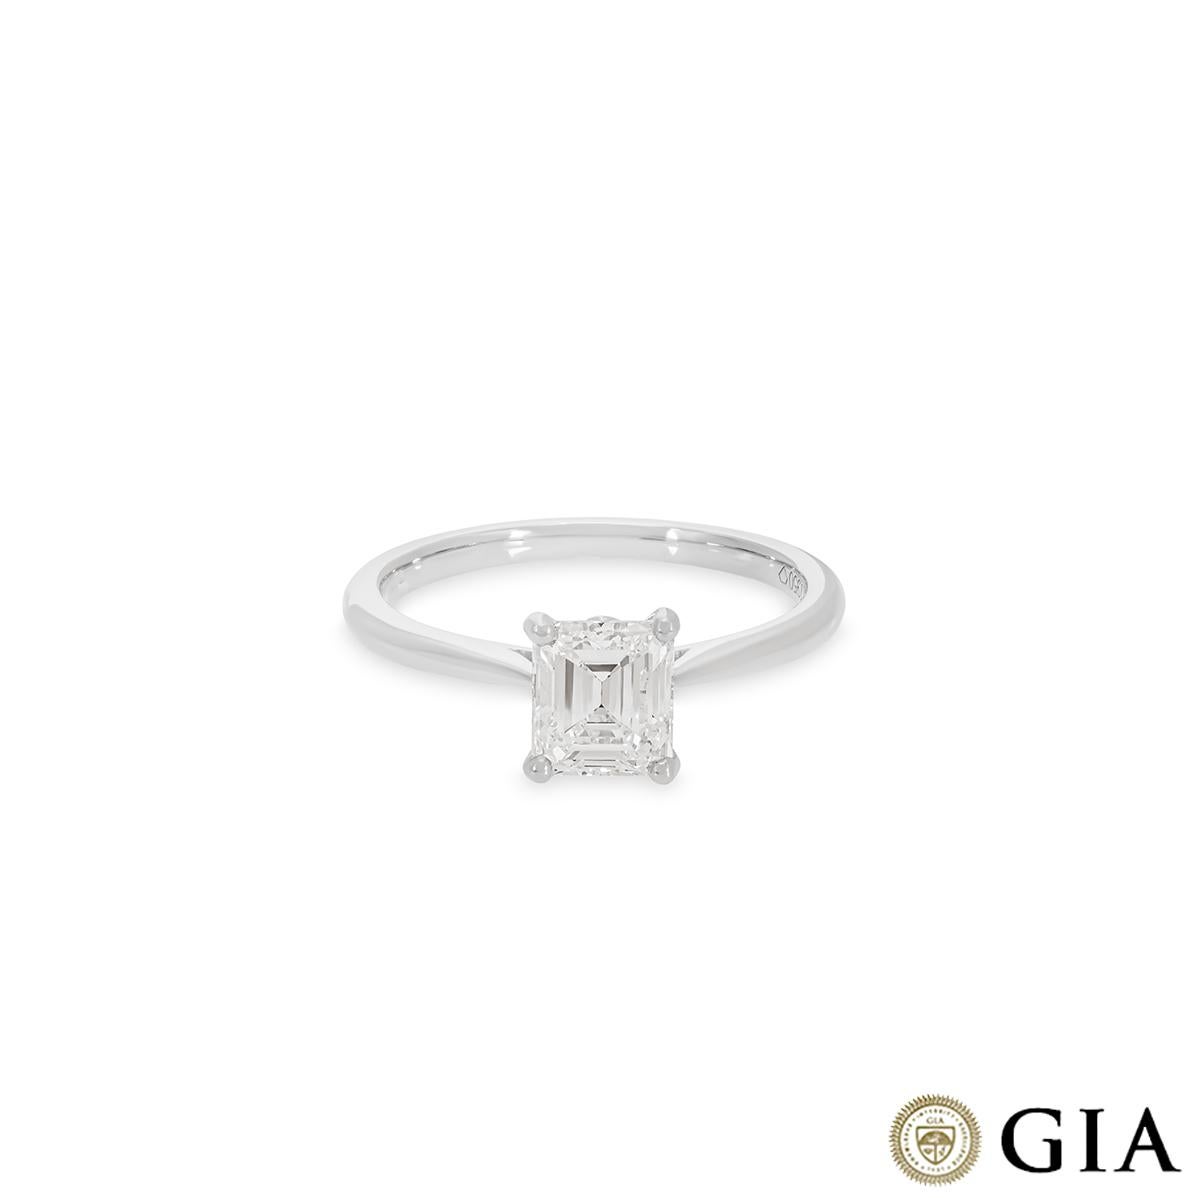 GIA Certified Platinum Emerald Cut Diamond Engagement Ring 1.03Carat E/VVS2 In New Condition For Sale In London, GB